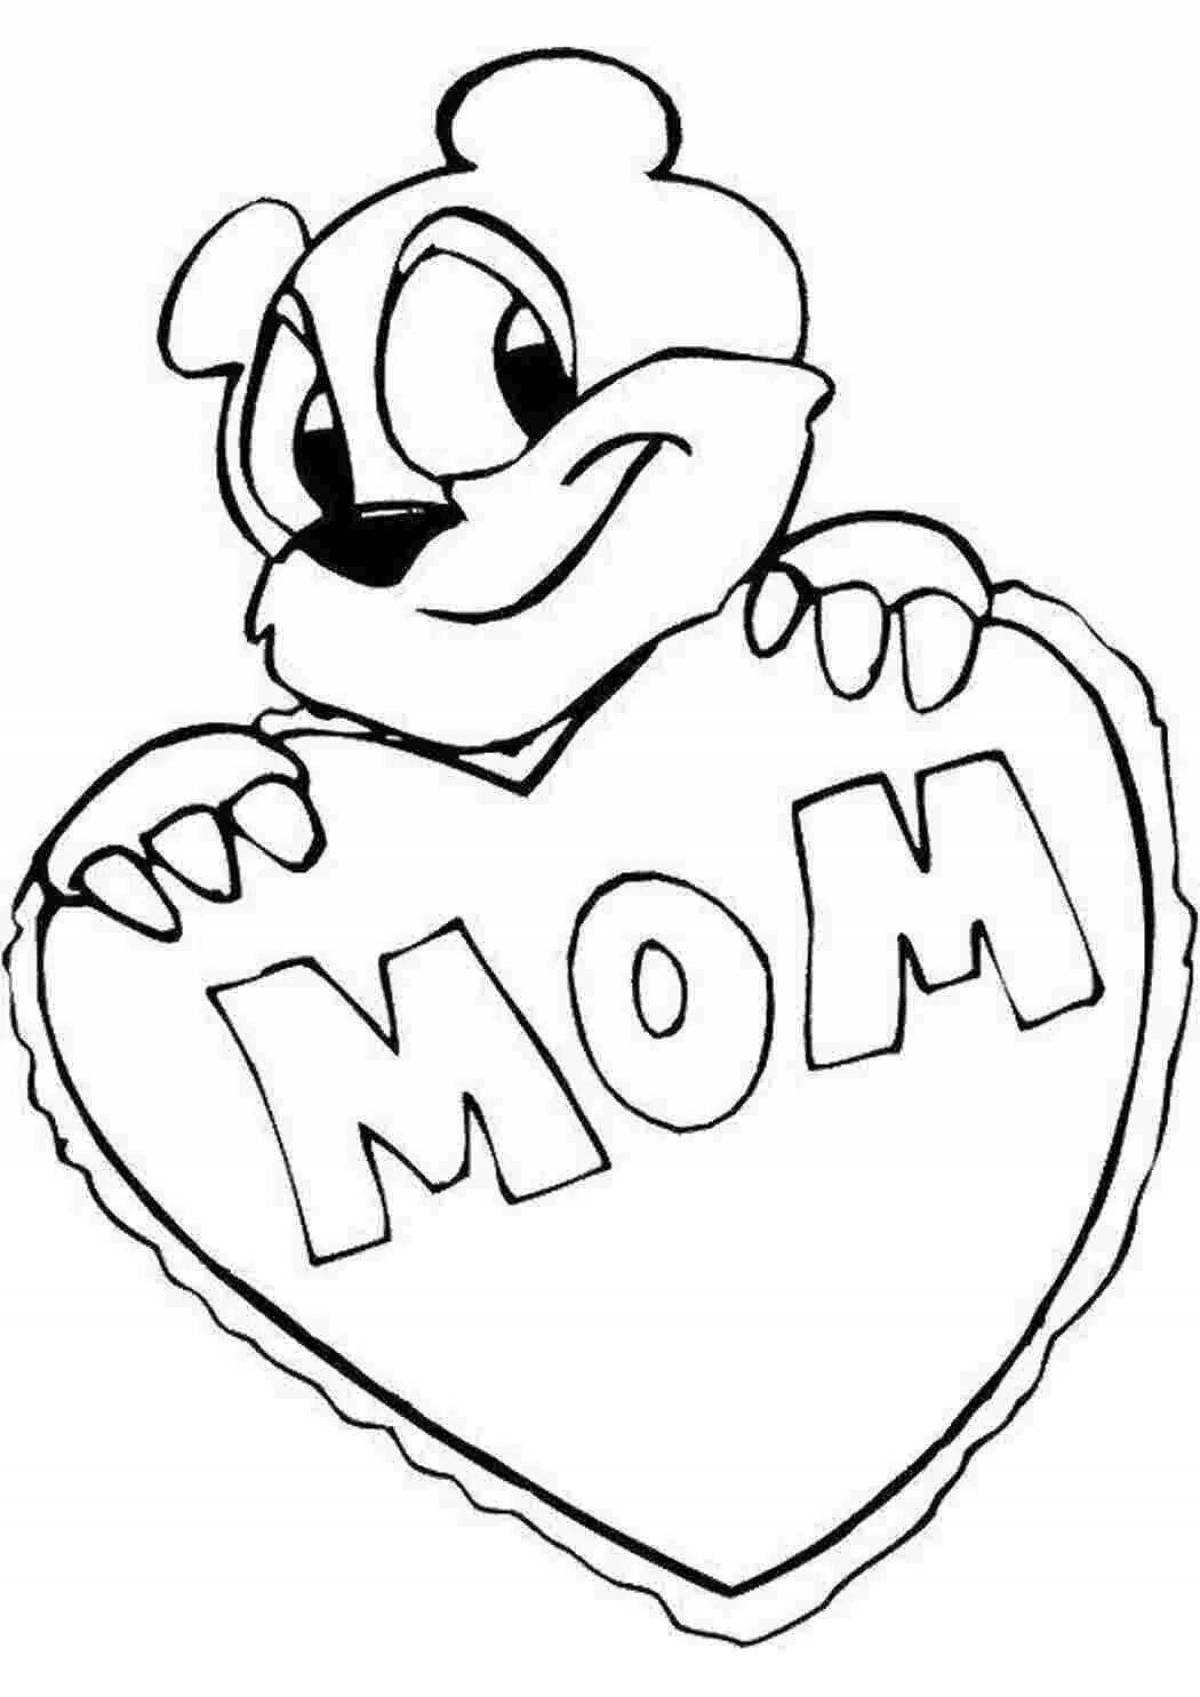 Great birthday coloring pages for mom from daughter